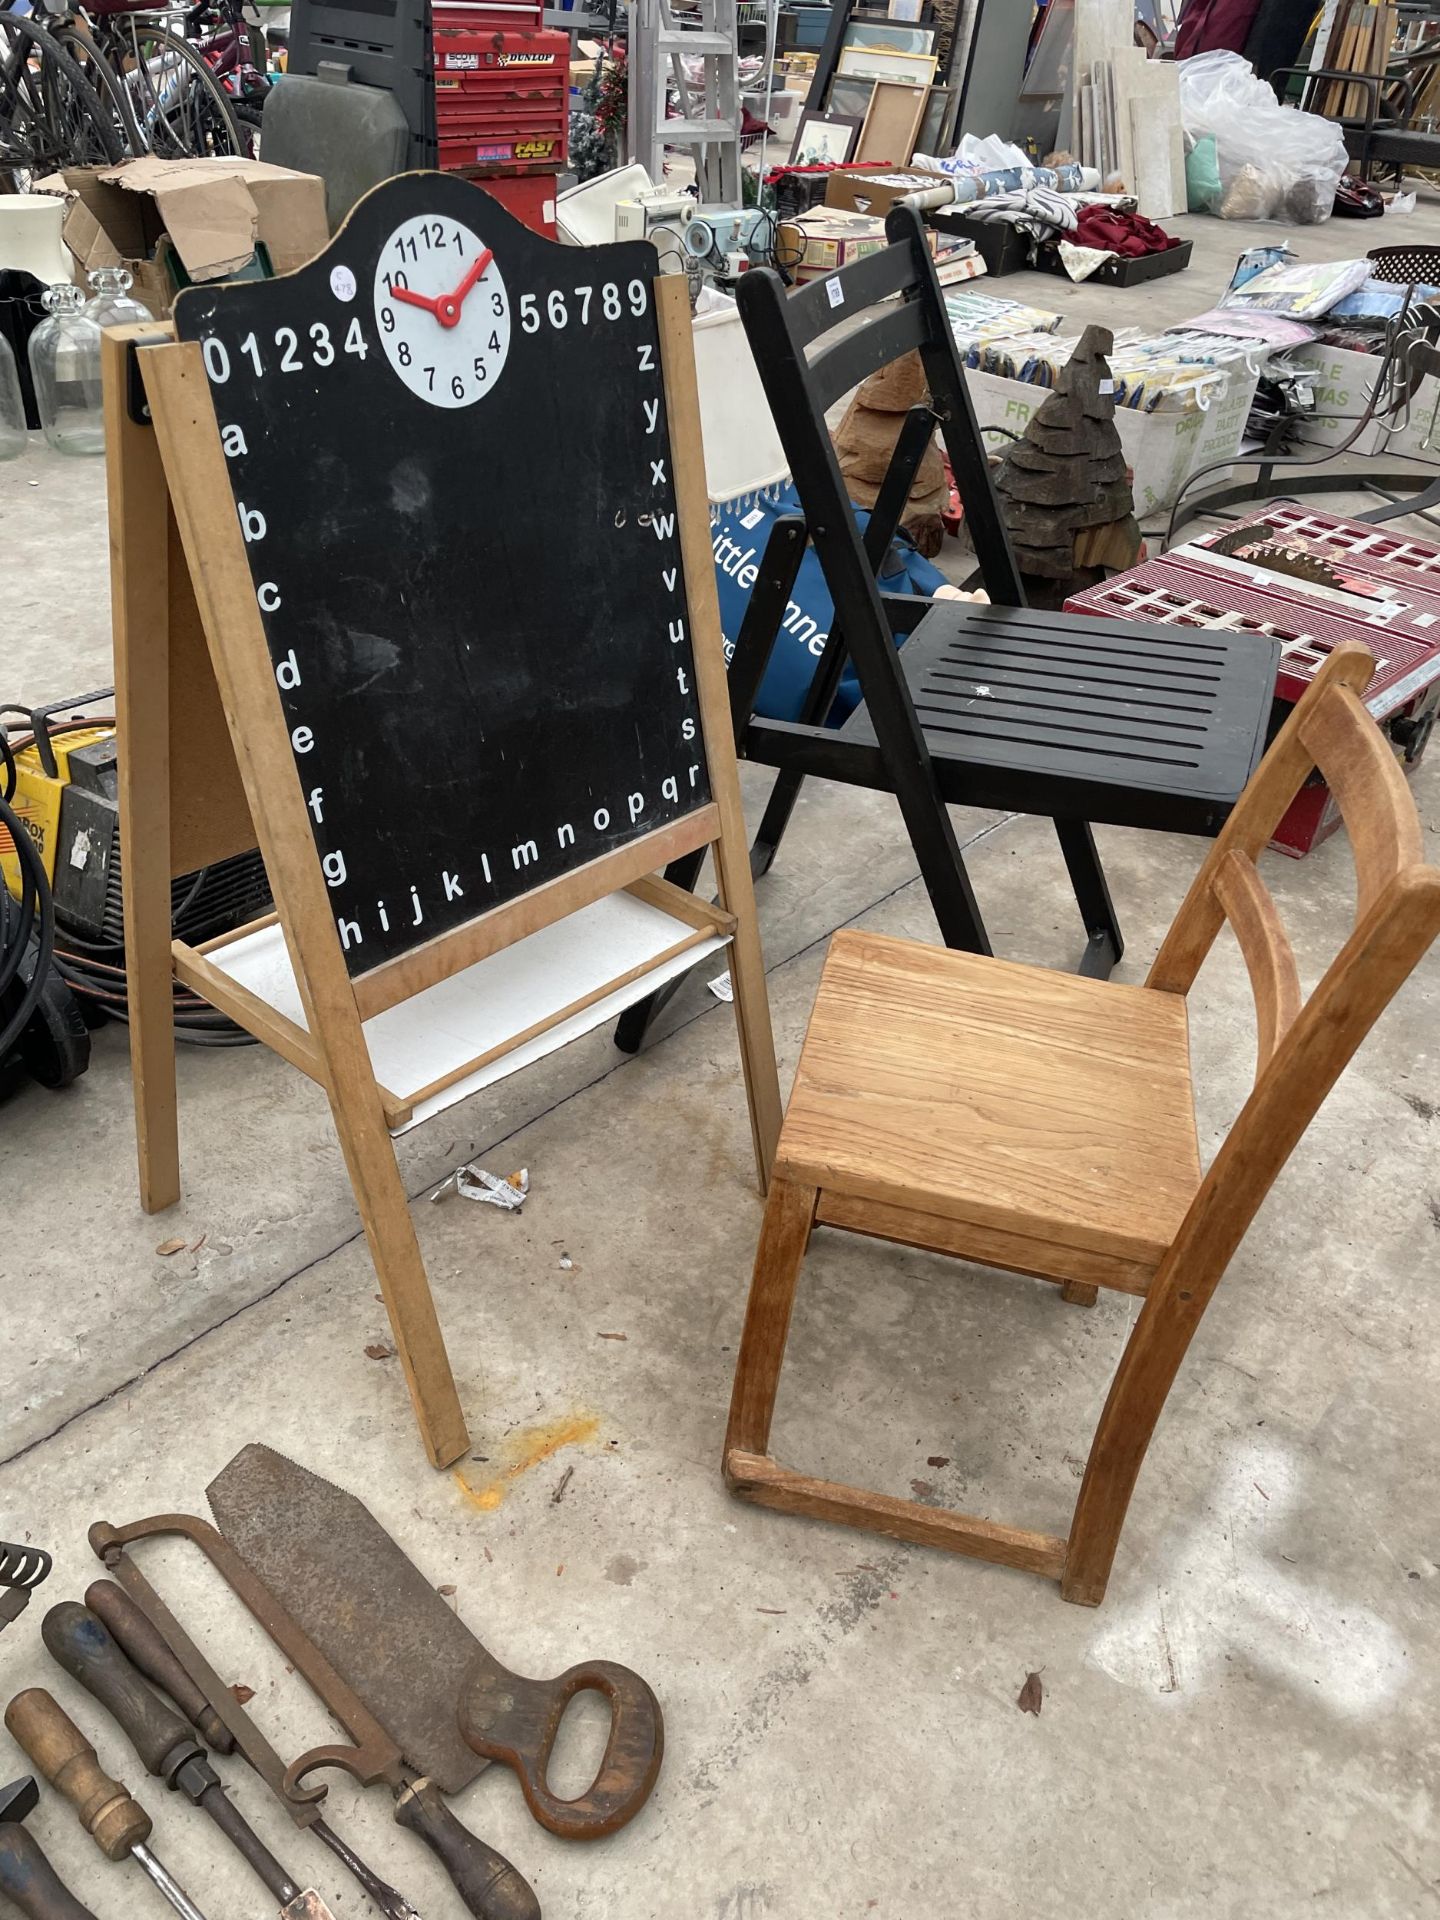 A FOLDING WOODEN CHAIR, A CHILDS CHALK BOARD AND A CHILDS CHAIRS - Image 2 of 2